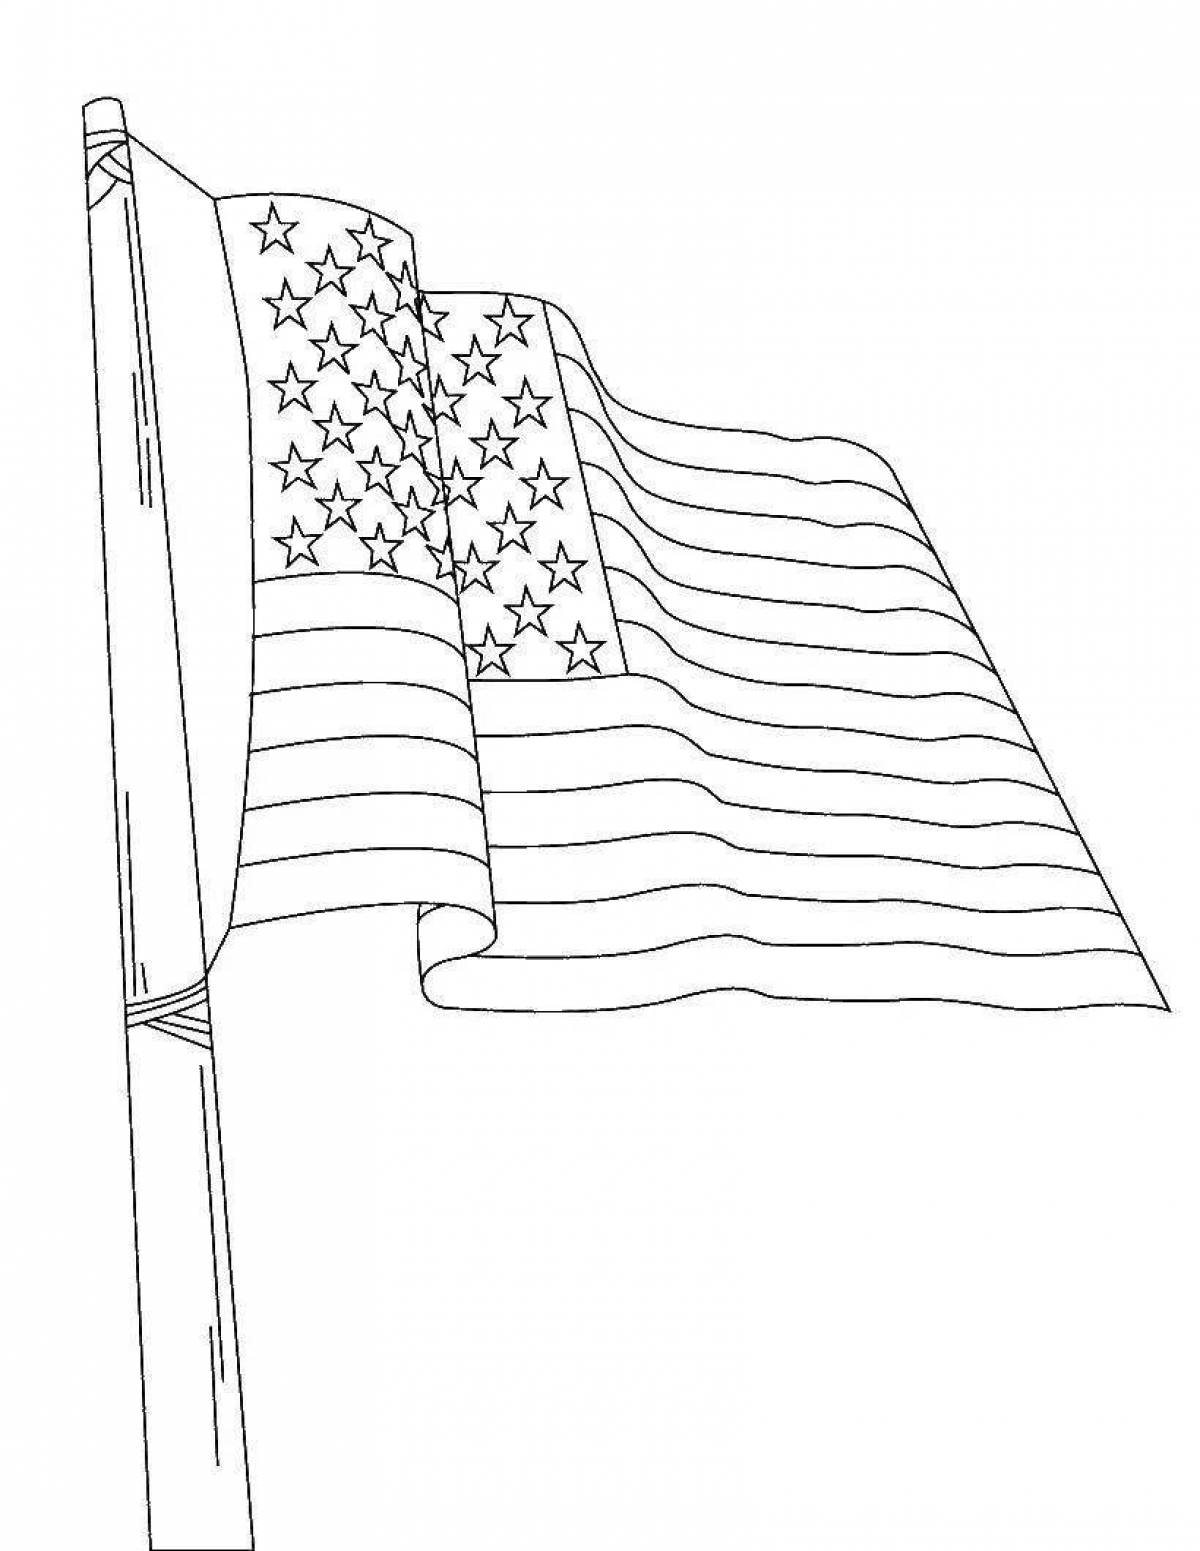 Cute flag coloring page for kids